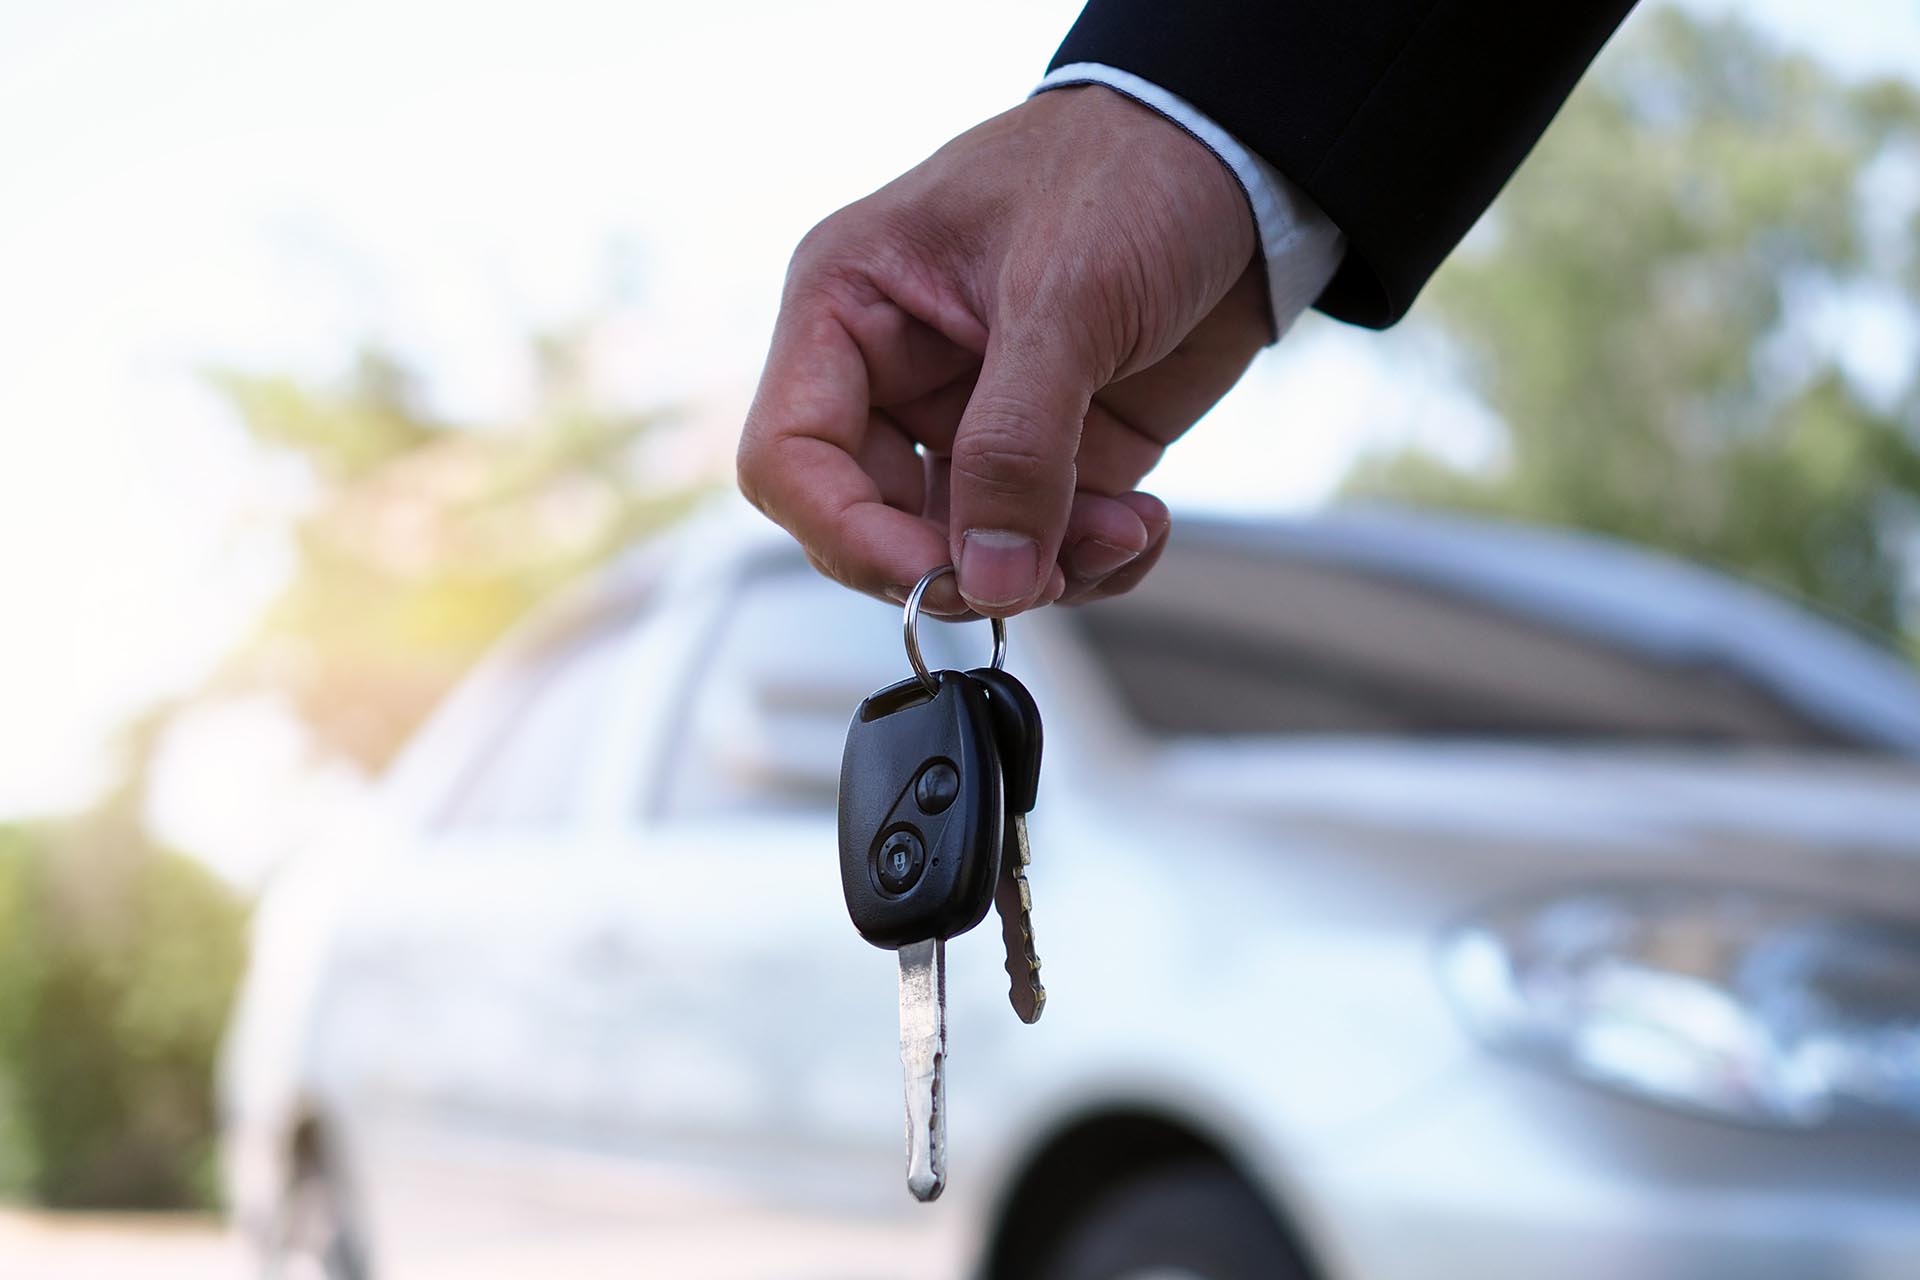 The car owner is handing the car keys to the buyer in a repossession.